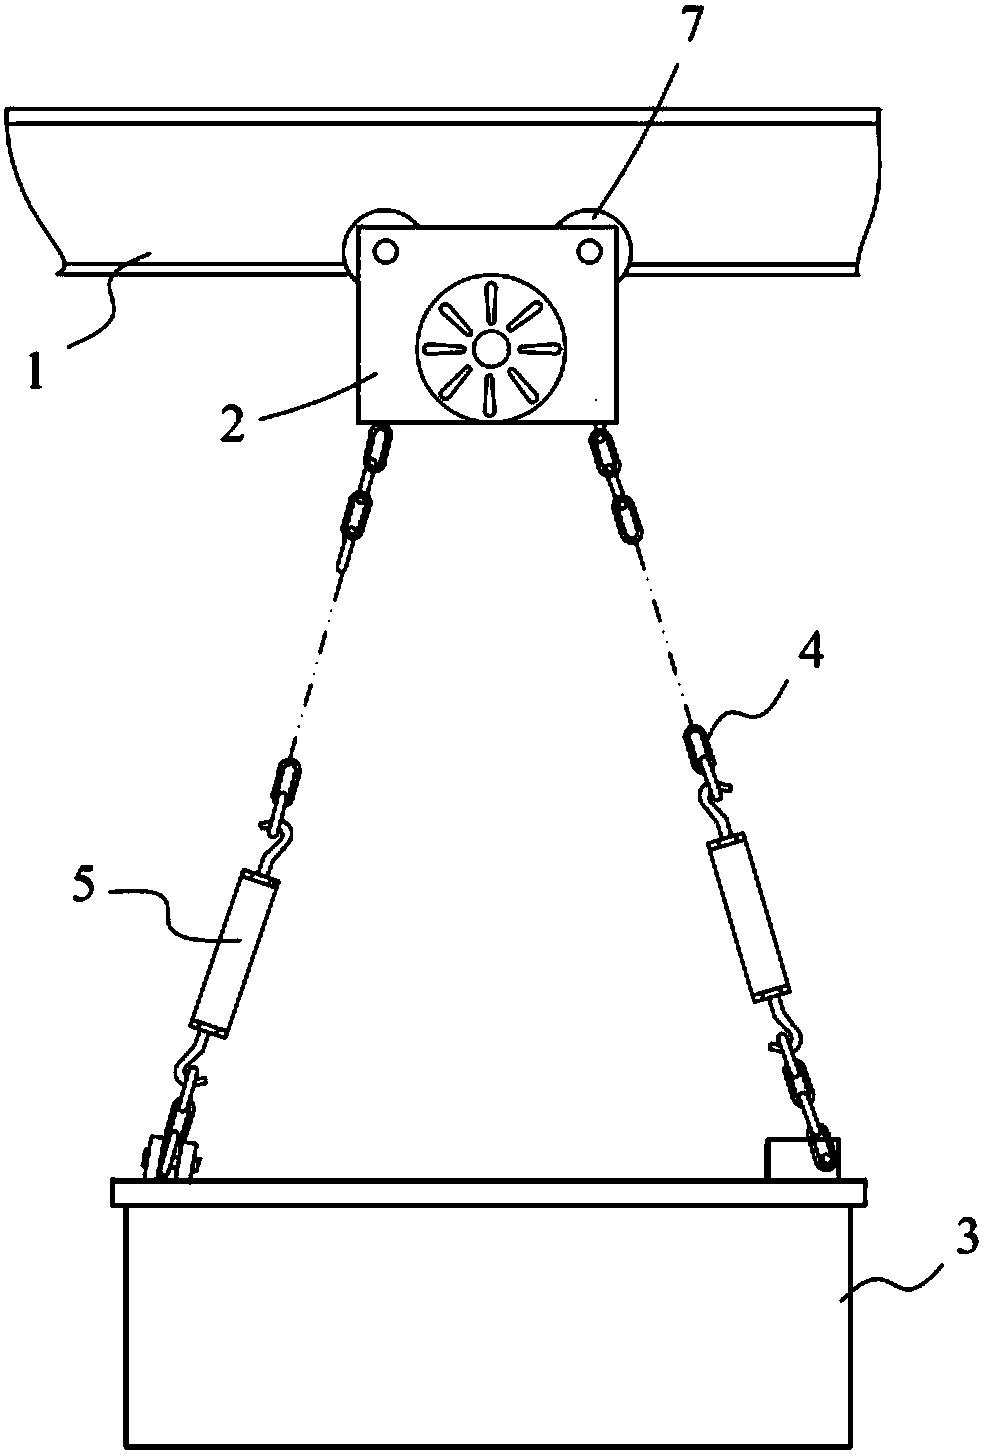 Electromagnetic iron removal device